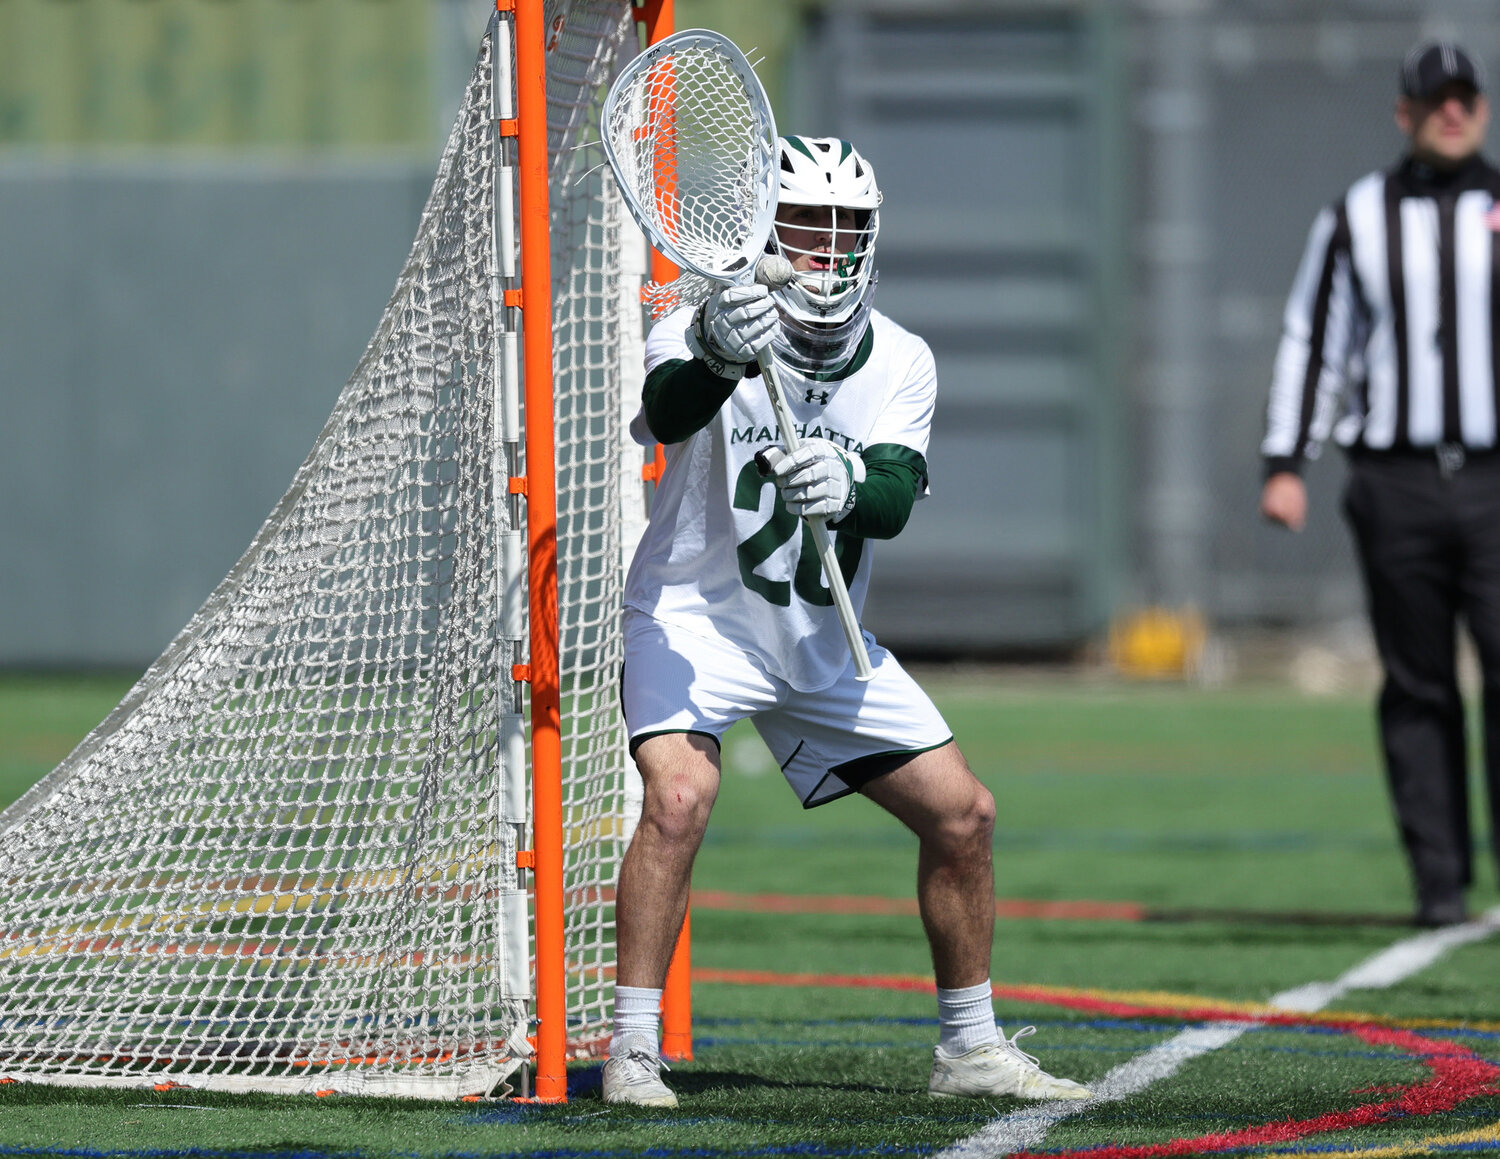 Manhattan fifth-year Joe Persico leads all Division I goalies in goals allowed per game with 8.24 across 13 games. At 9-4, Persico and the Jaspers have clinched the program’s second consecutive winning season, a year after having to replace former star goalie Brendan Krebs, who has since graduated.